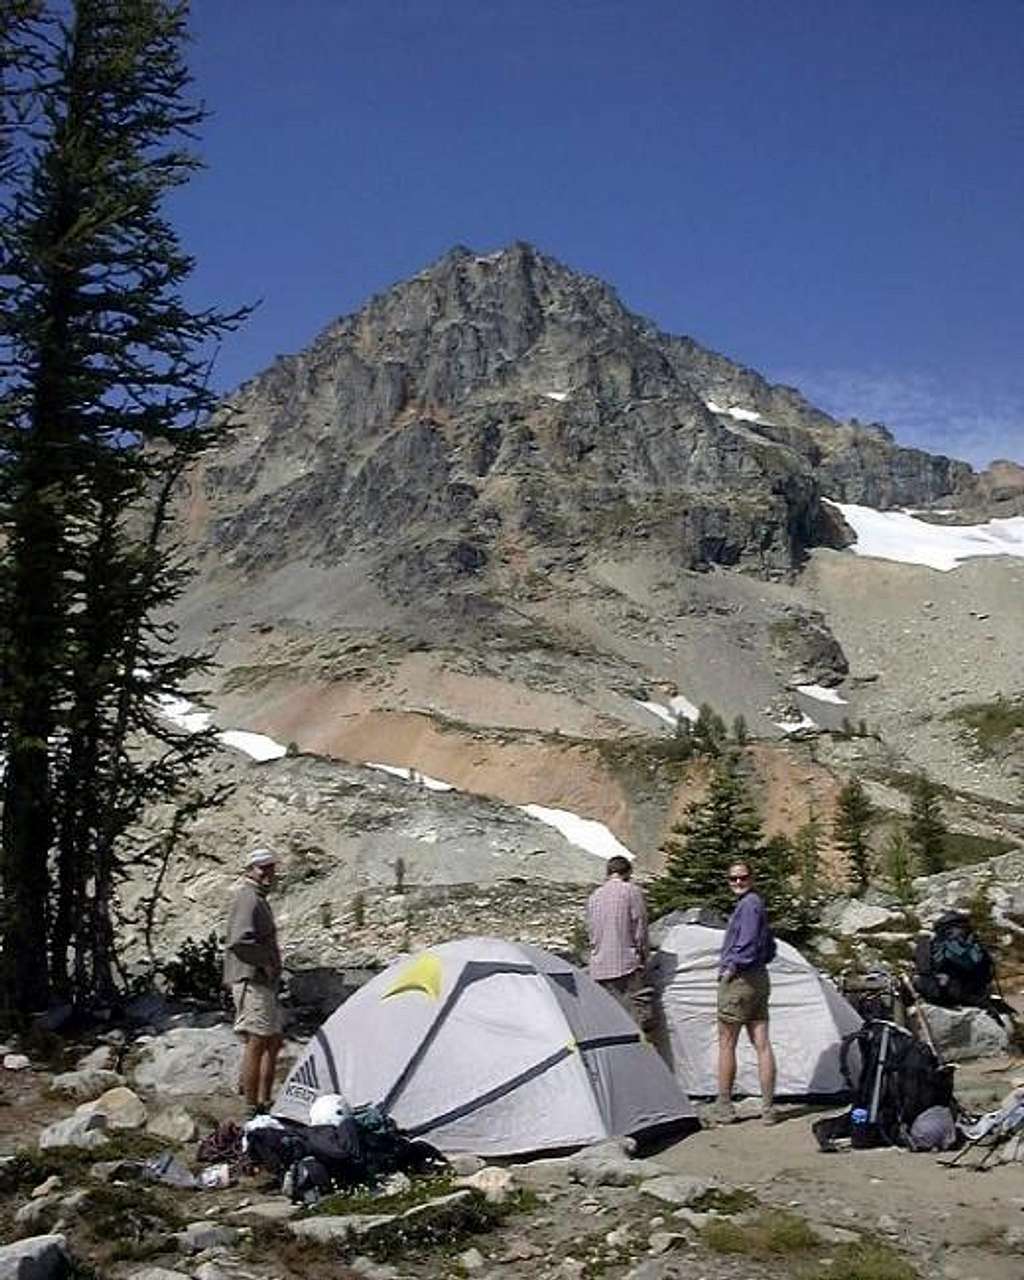 Our high camp at the lake...